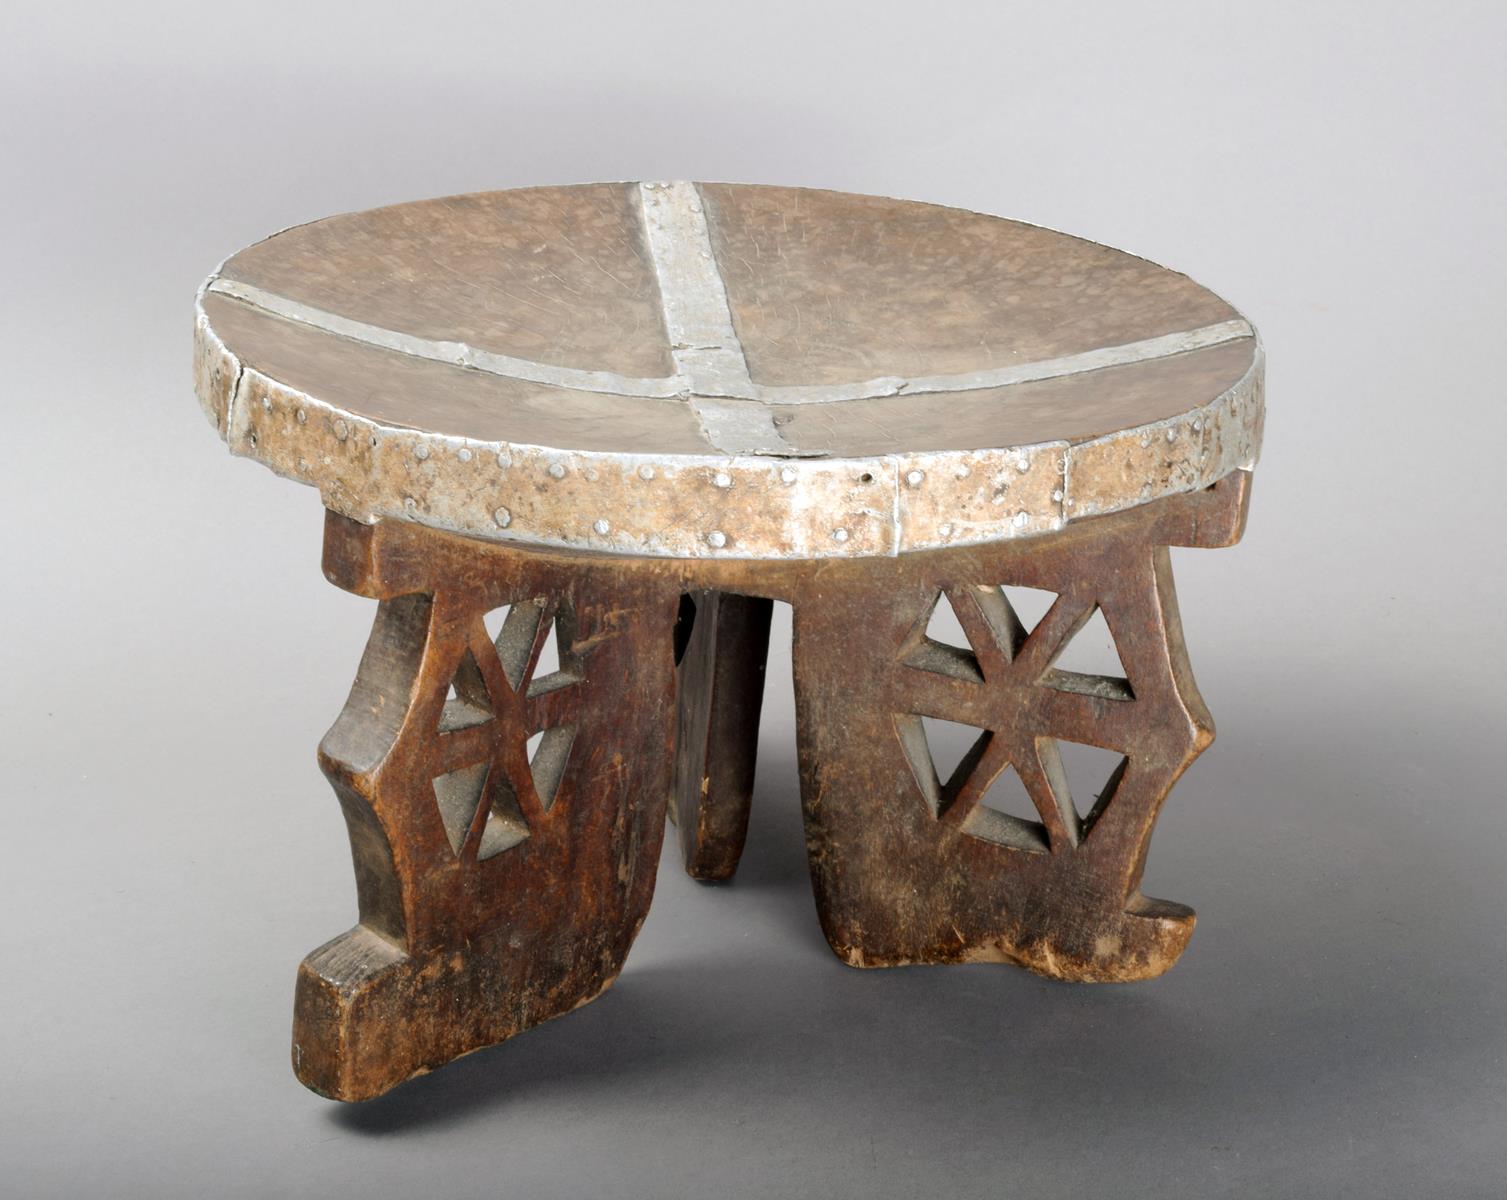 A Kamba stool Kenya wood, with applied aluminium bands and with pierced legs, 18cm high.